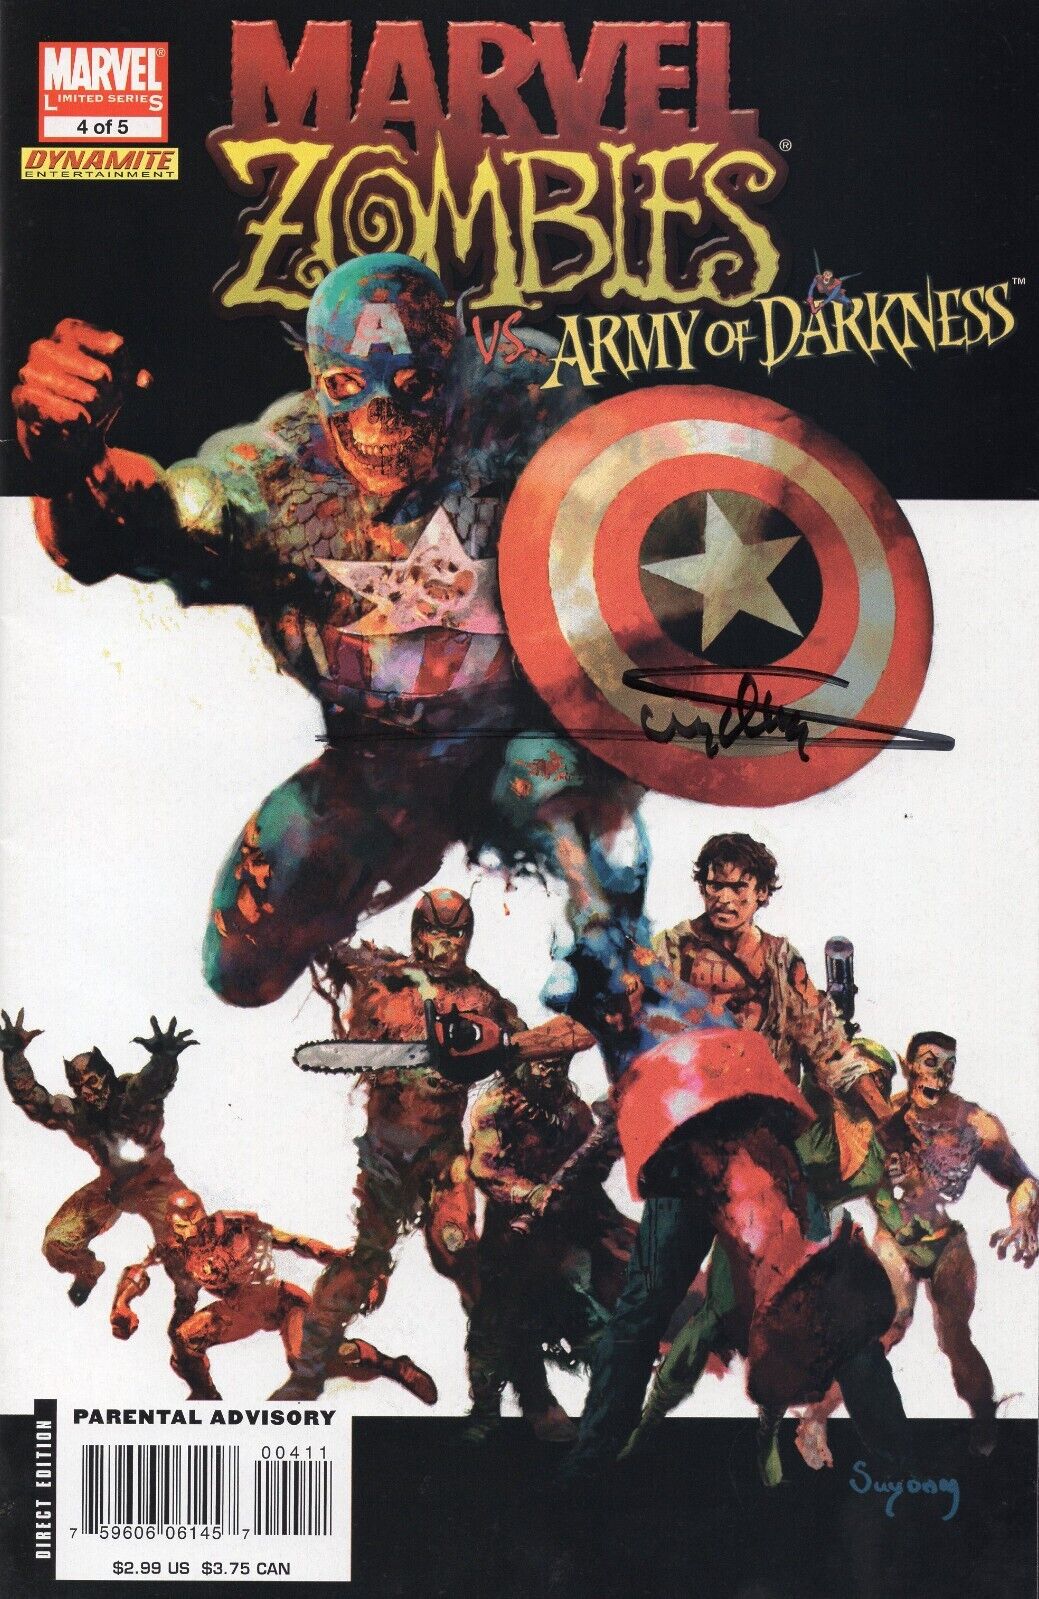 MARVEL ZOMBIES vs ARMY OF DARKNESS #4 SIGNED BY ARTIST ARTHUR SUYDAM